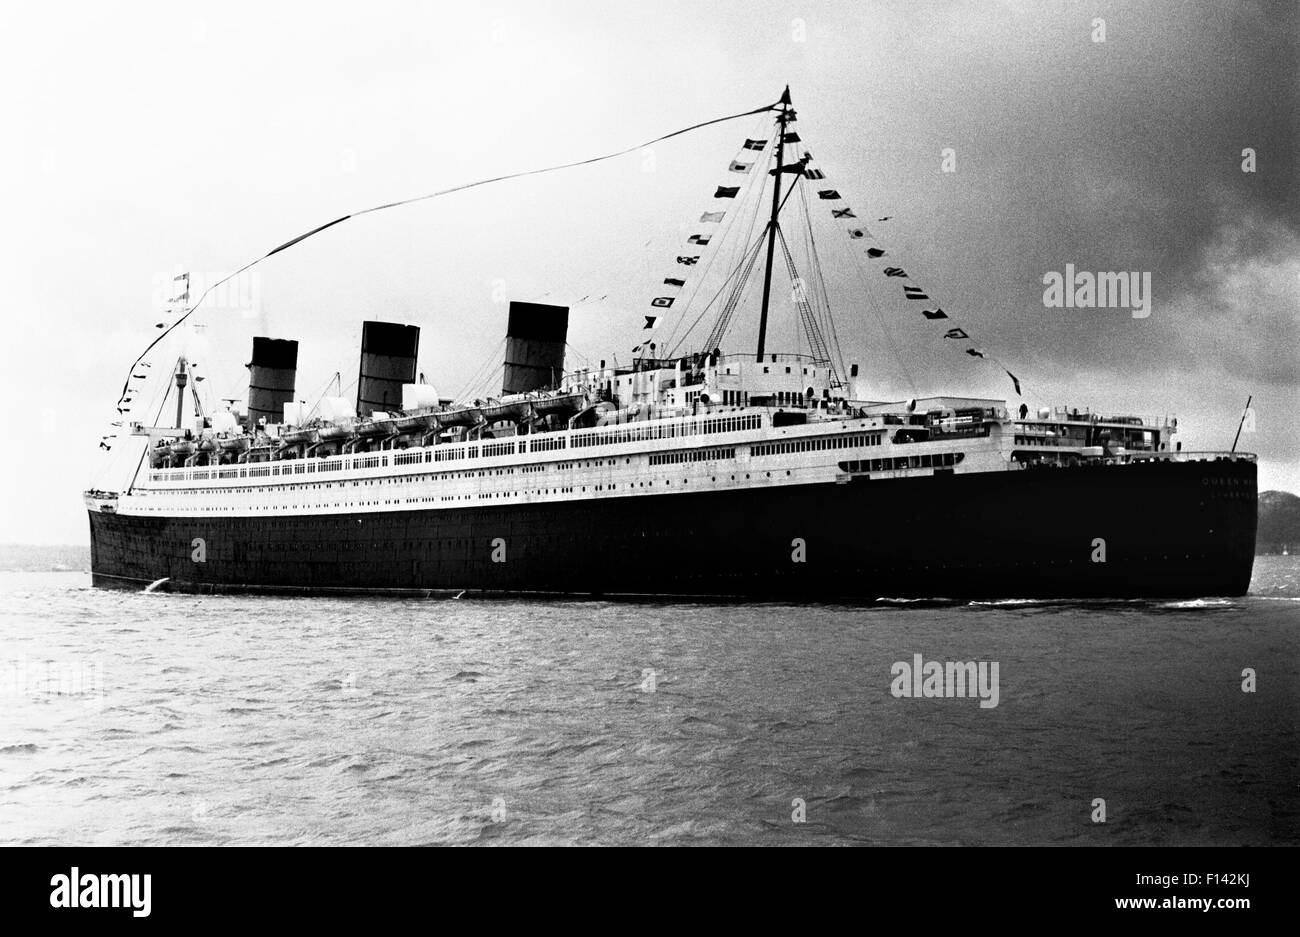 AJAXNETPHOTO. 31ST OCTOBER, 1967. SOLENT, ENGLAND. - FINAL VOYAGE - CUNARD TRANSATLANTIC LINER QUEEN MARY DRESSED OVERALL HEADS OUT OF THE SOLENT ON HER FINAL VOYAGE TO LONG BEACH CALIFORNIA. PHOTO:JONATHAN EASTLAND/AJAX REF:311067_1 Stock Photo